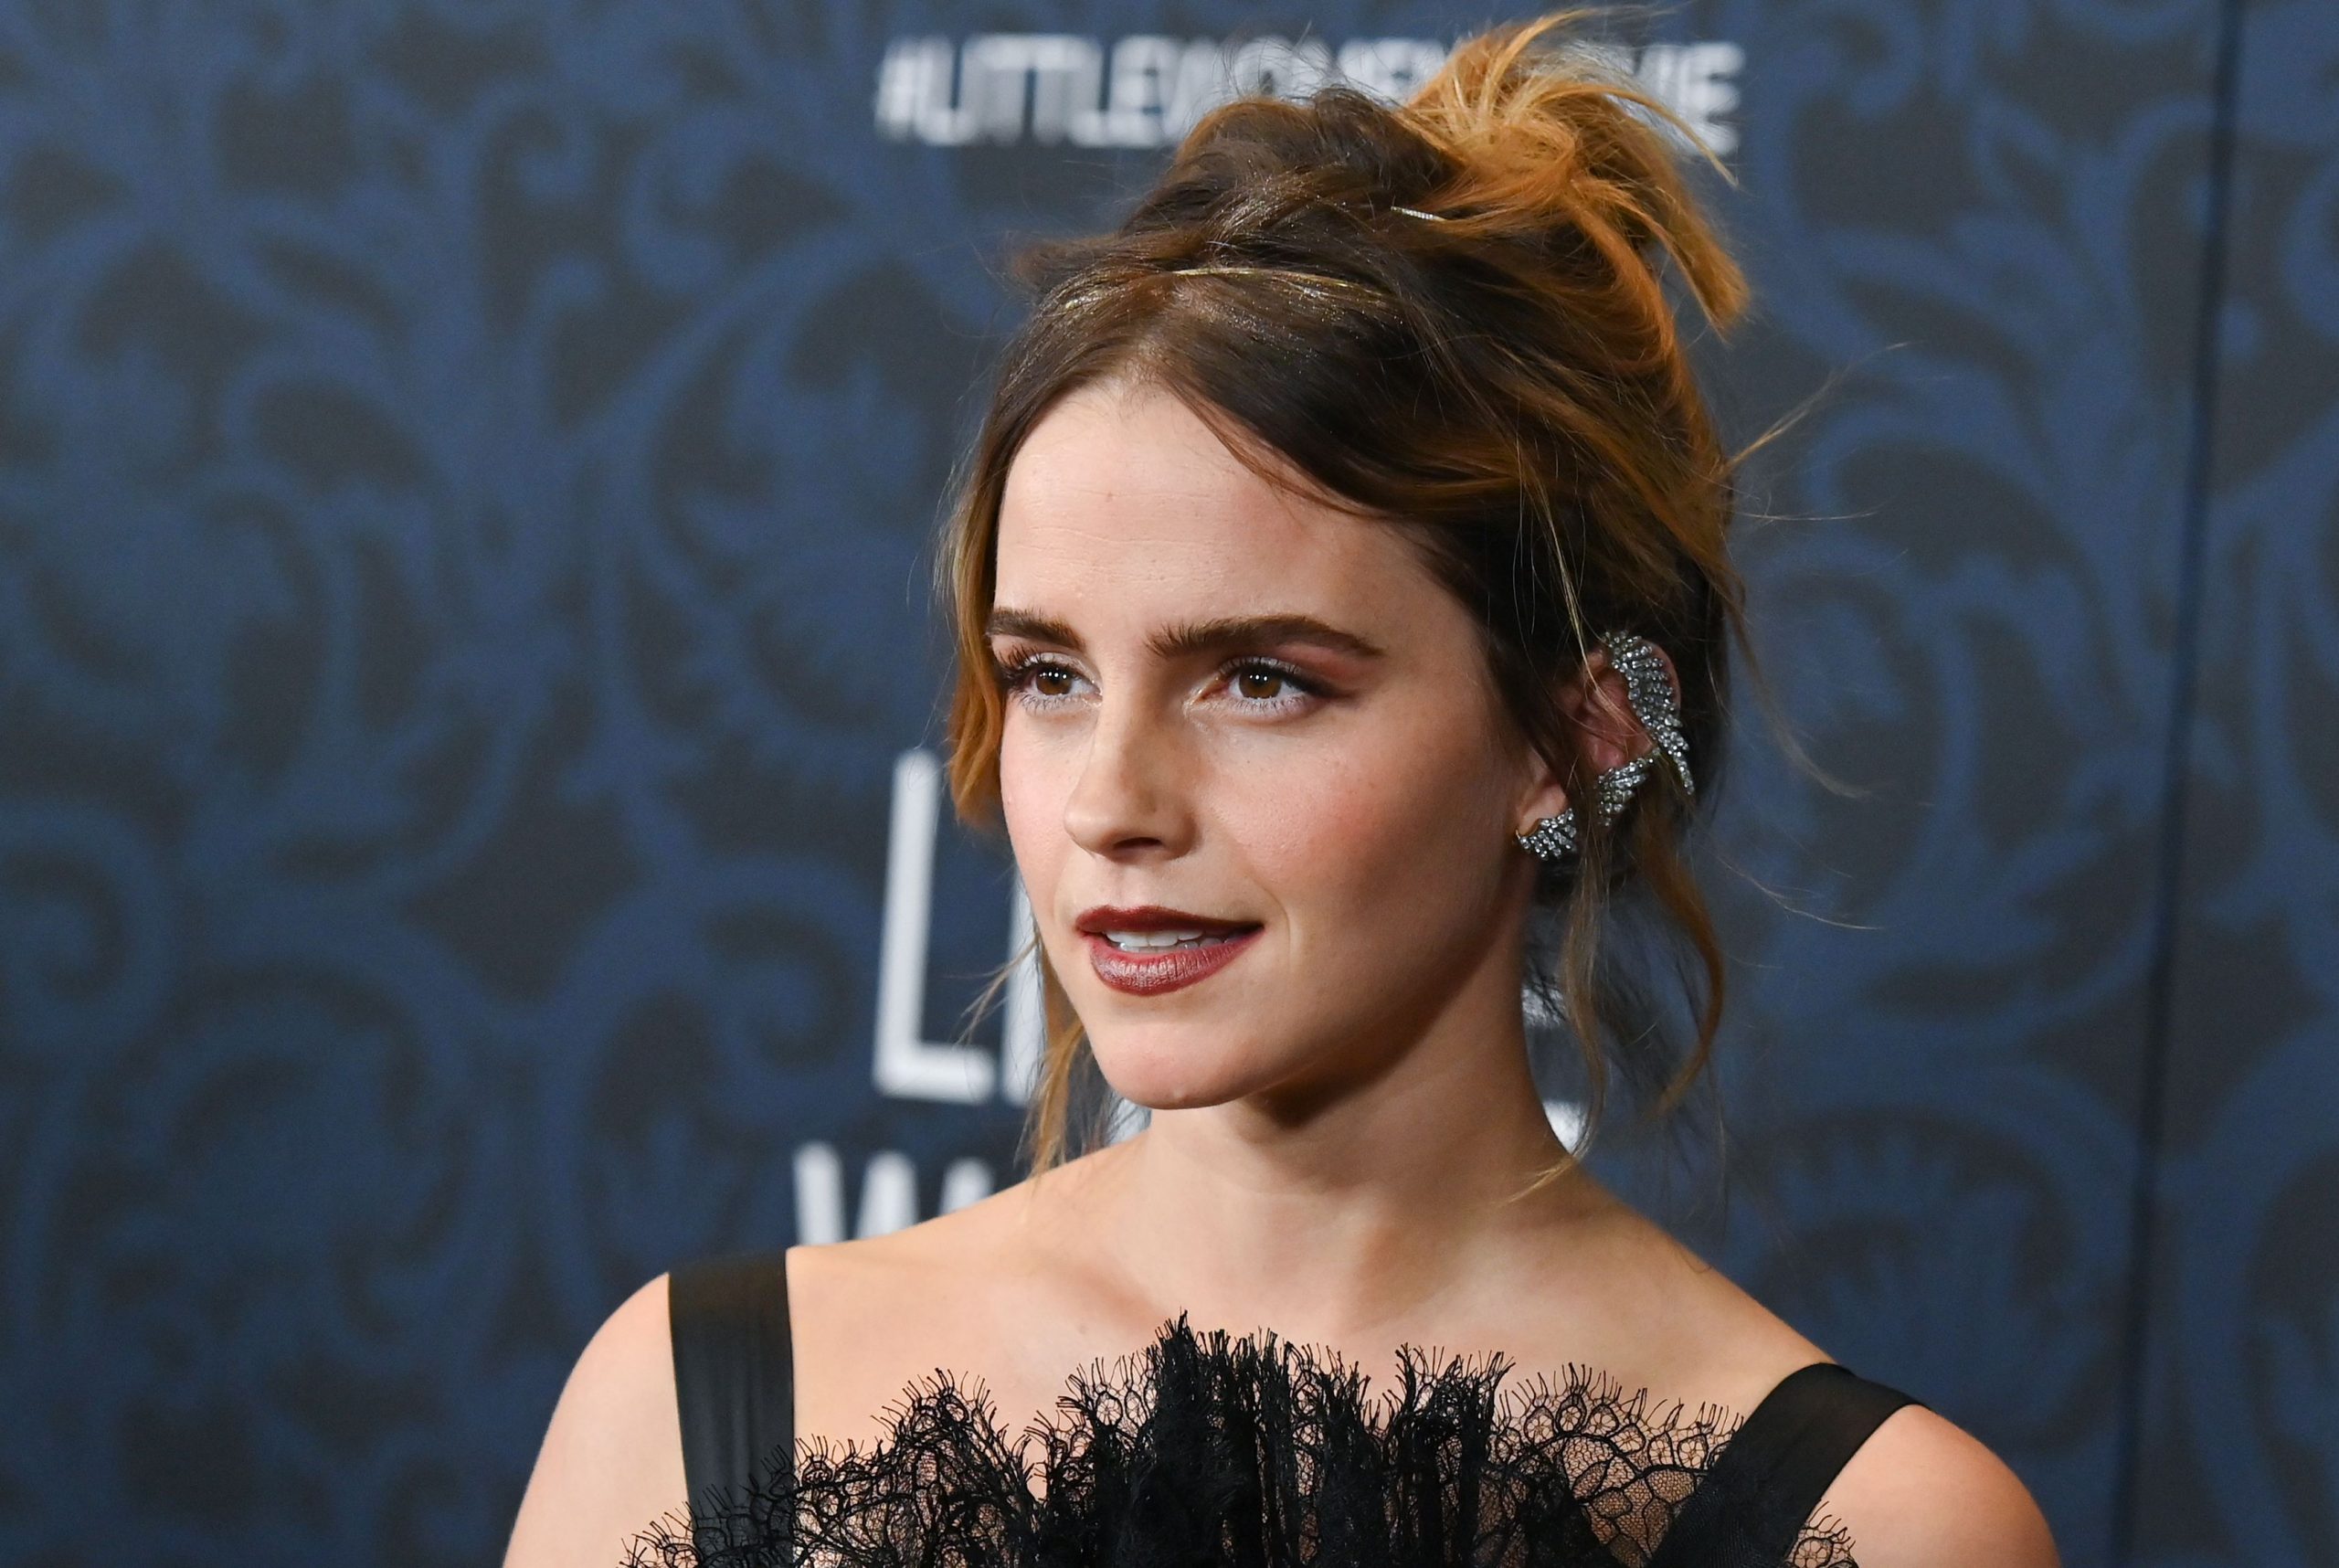 What is the net worth of Emma Watson?